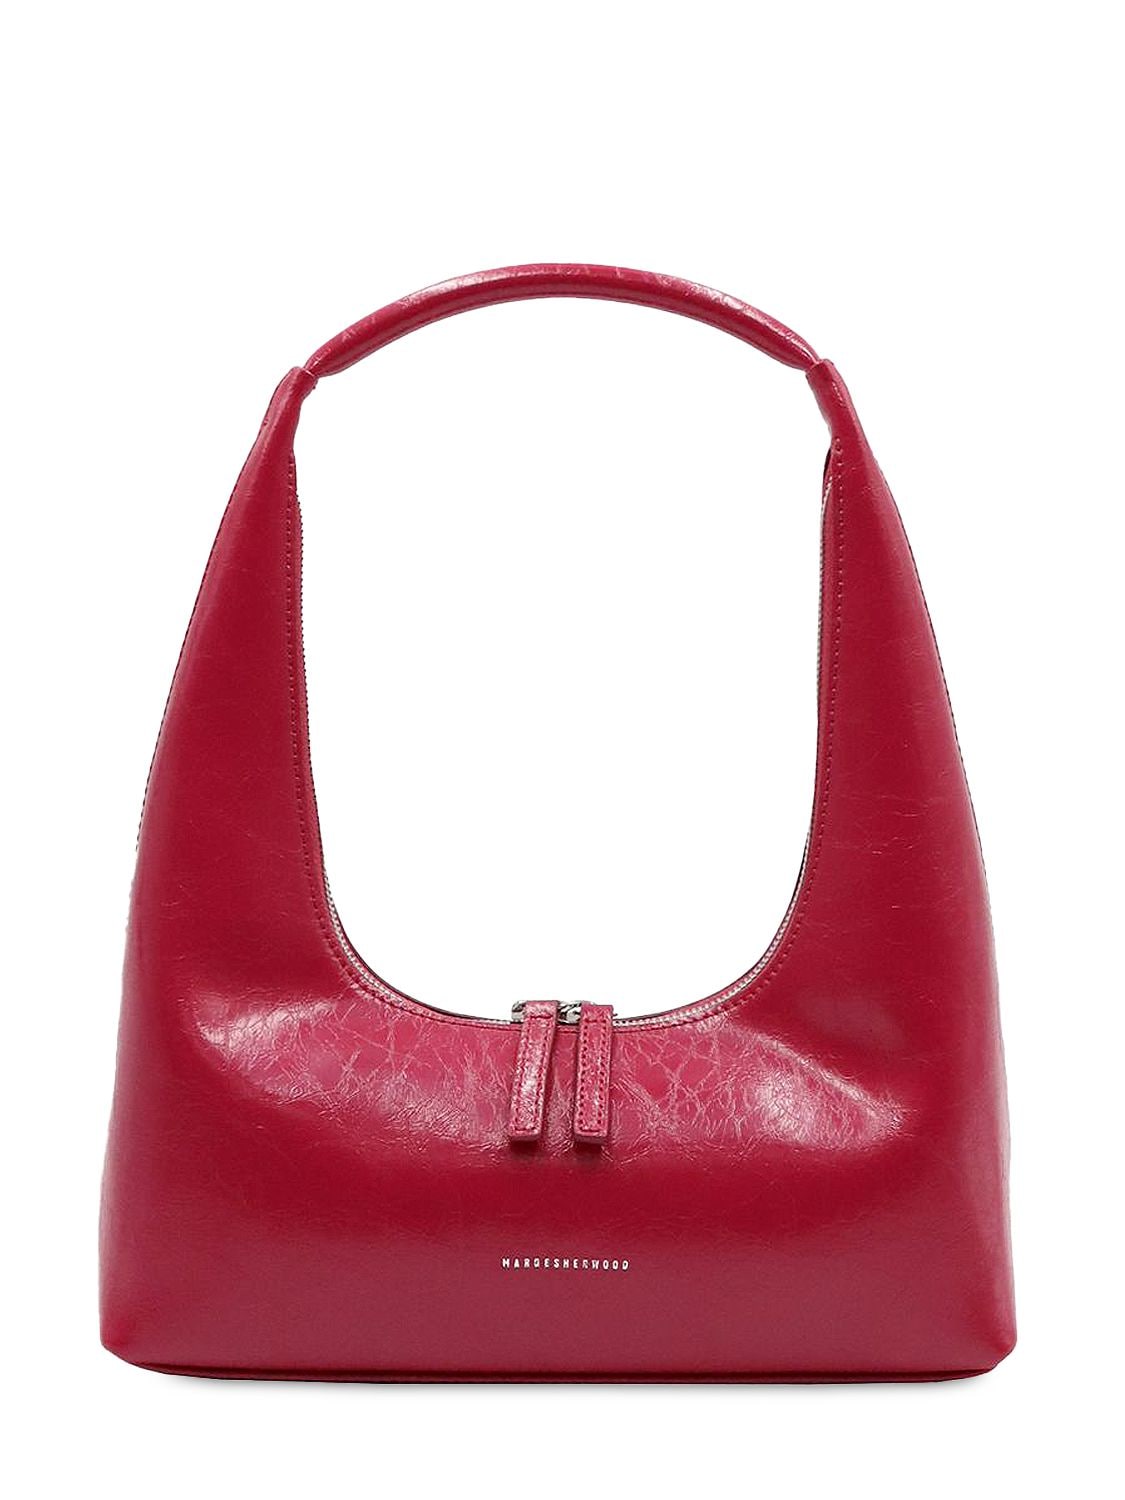 marge sherwood, Bags, Brand New Marge Sherwood Hobo Bag In Berry